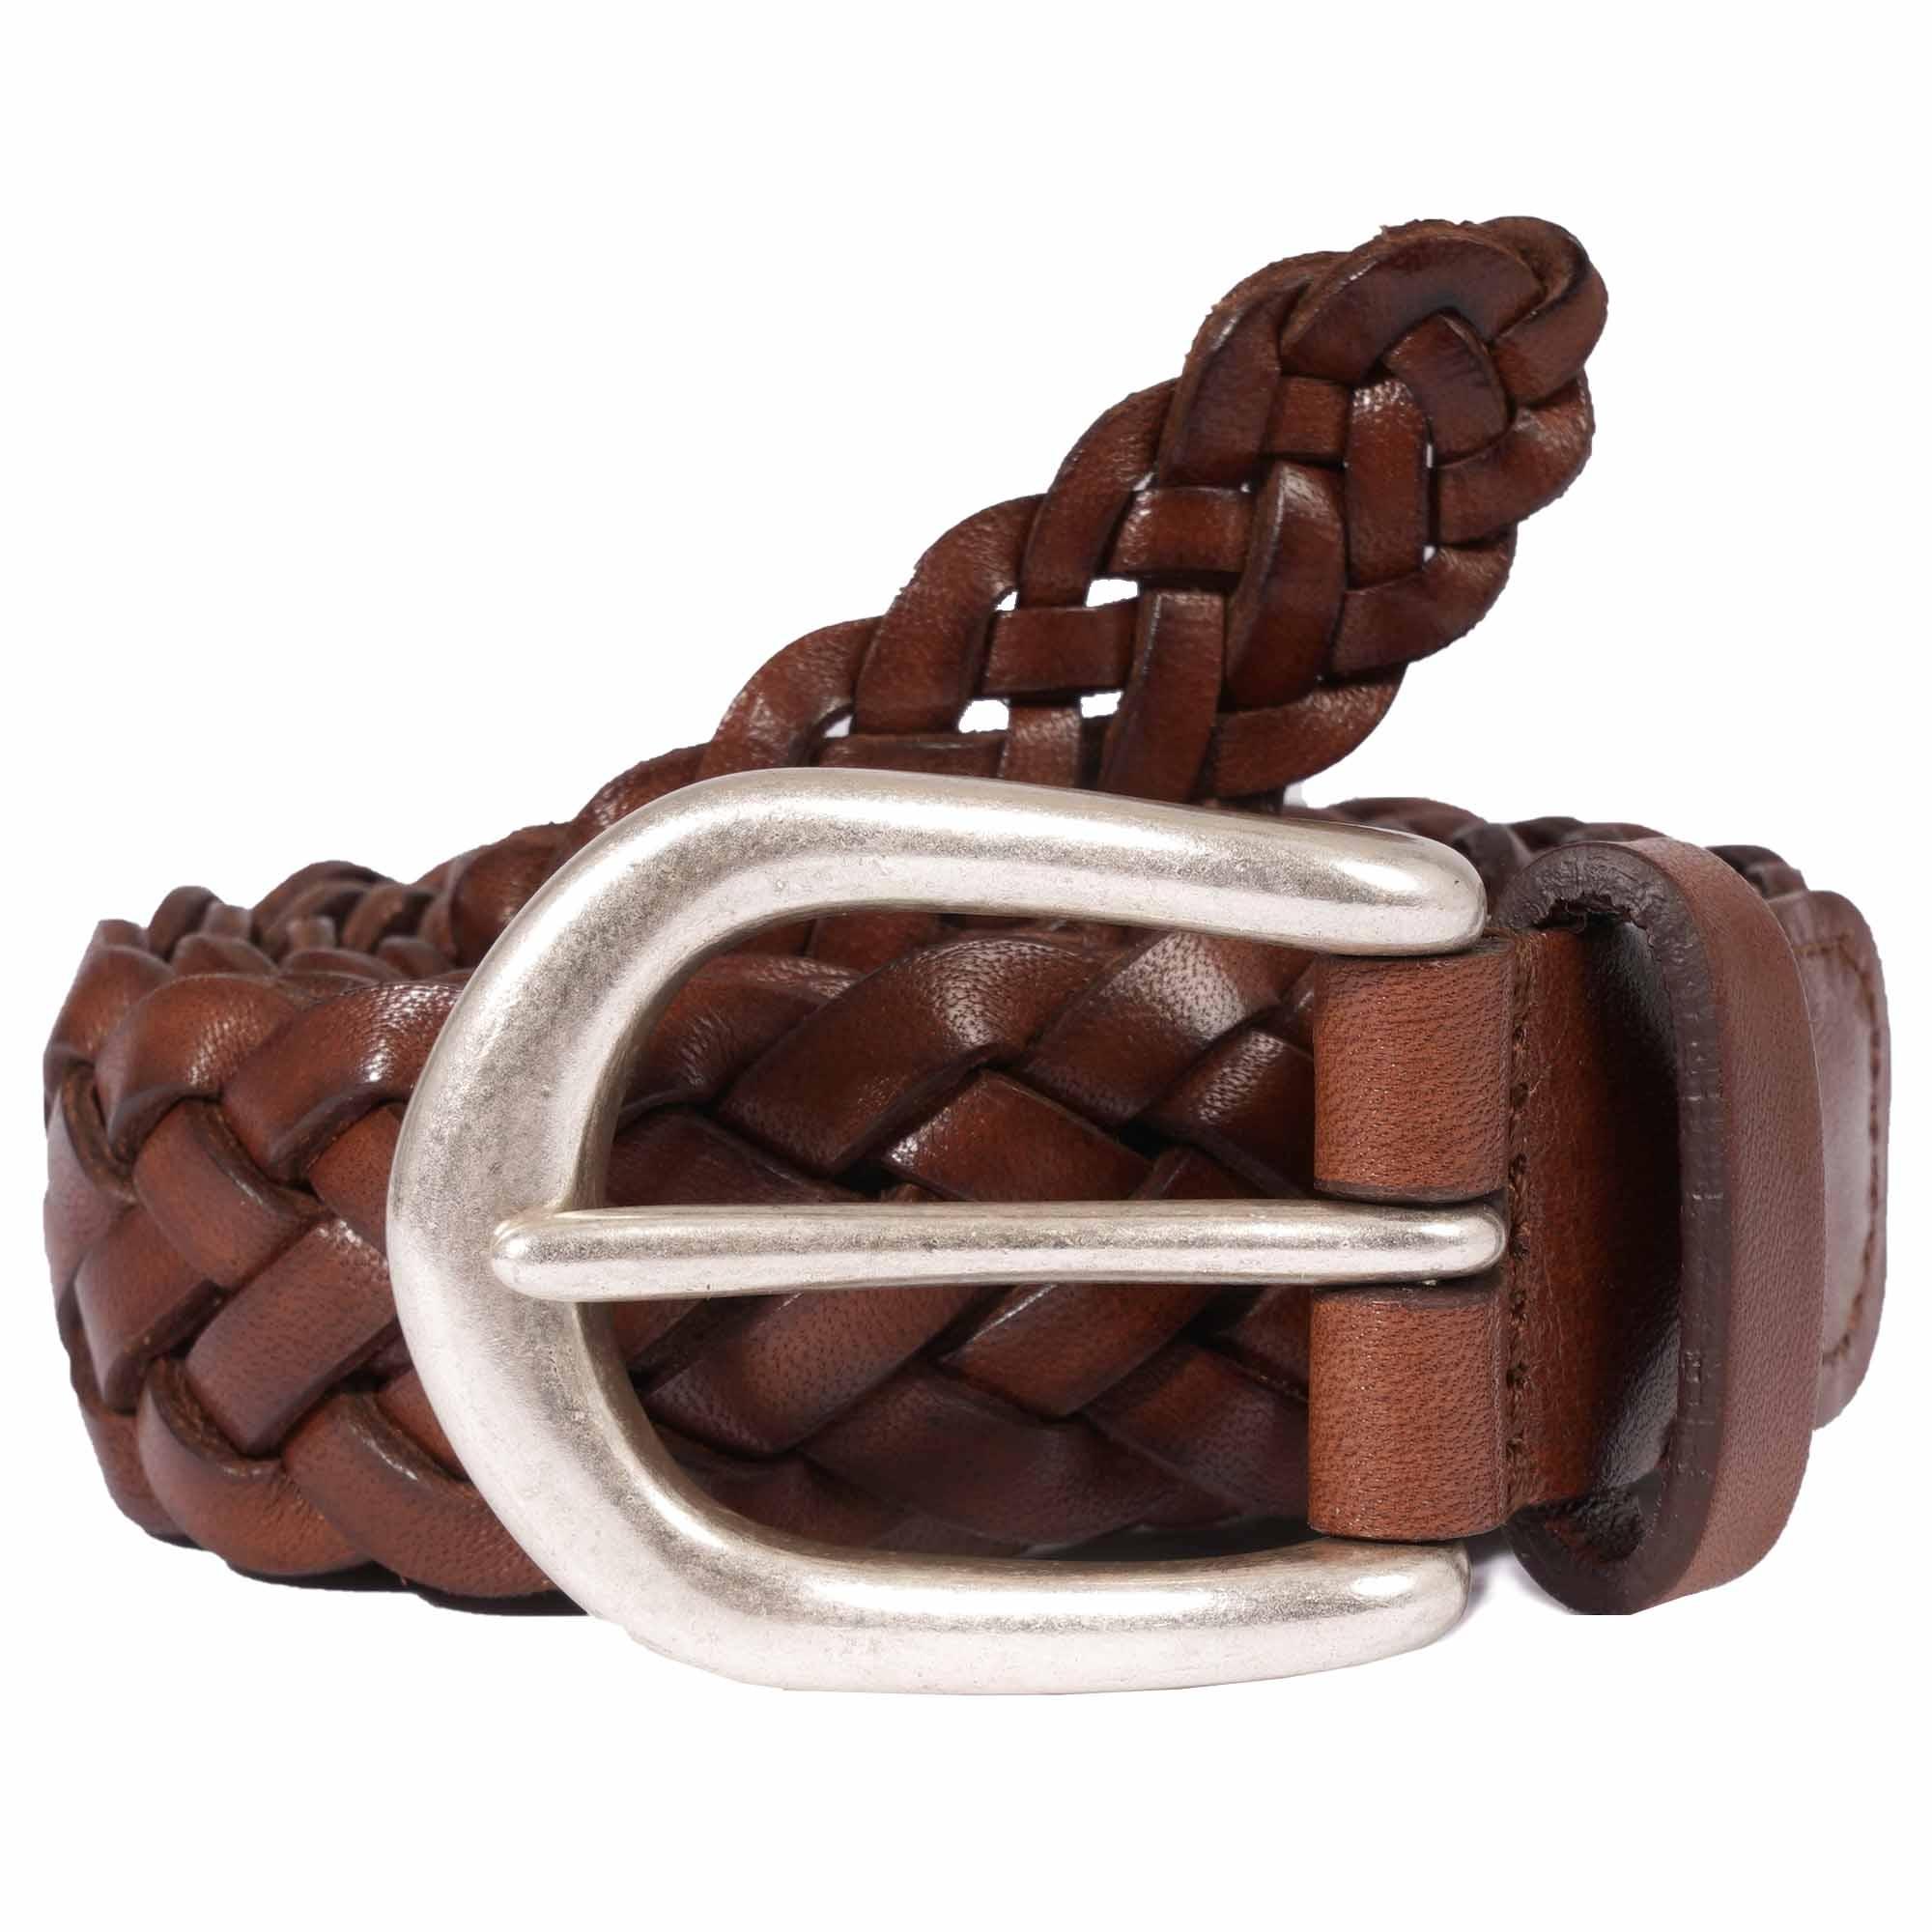 Andersons Woven Leather Belt - Brown in Brown for Men - Lyst